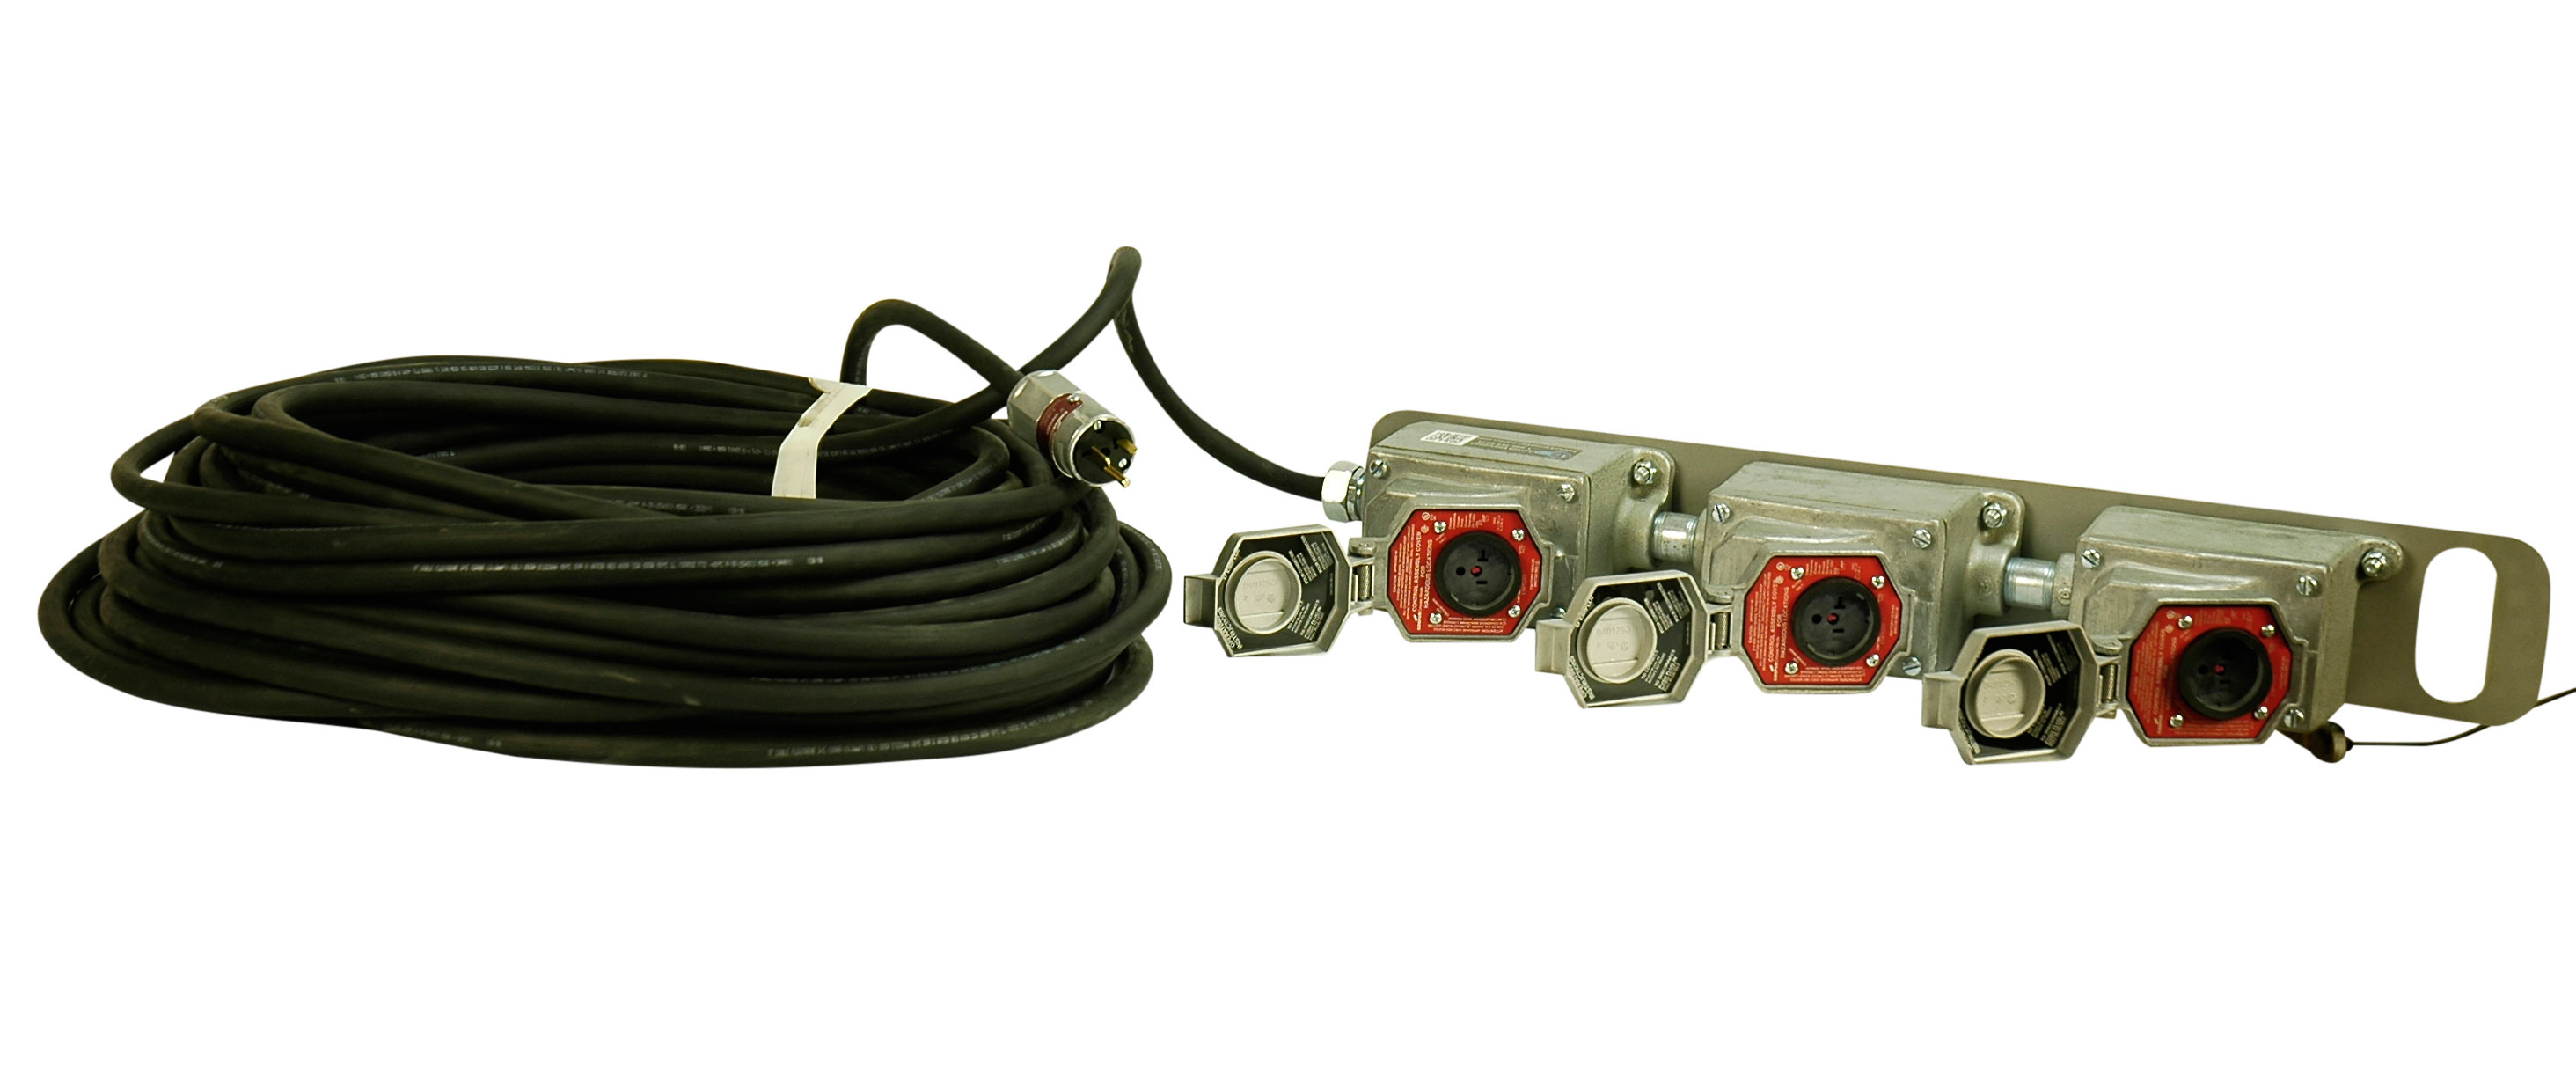 Explosion Proof Three Outlet Extension Cord Terminated with an Explosion Proof Plug